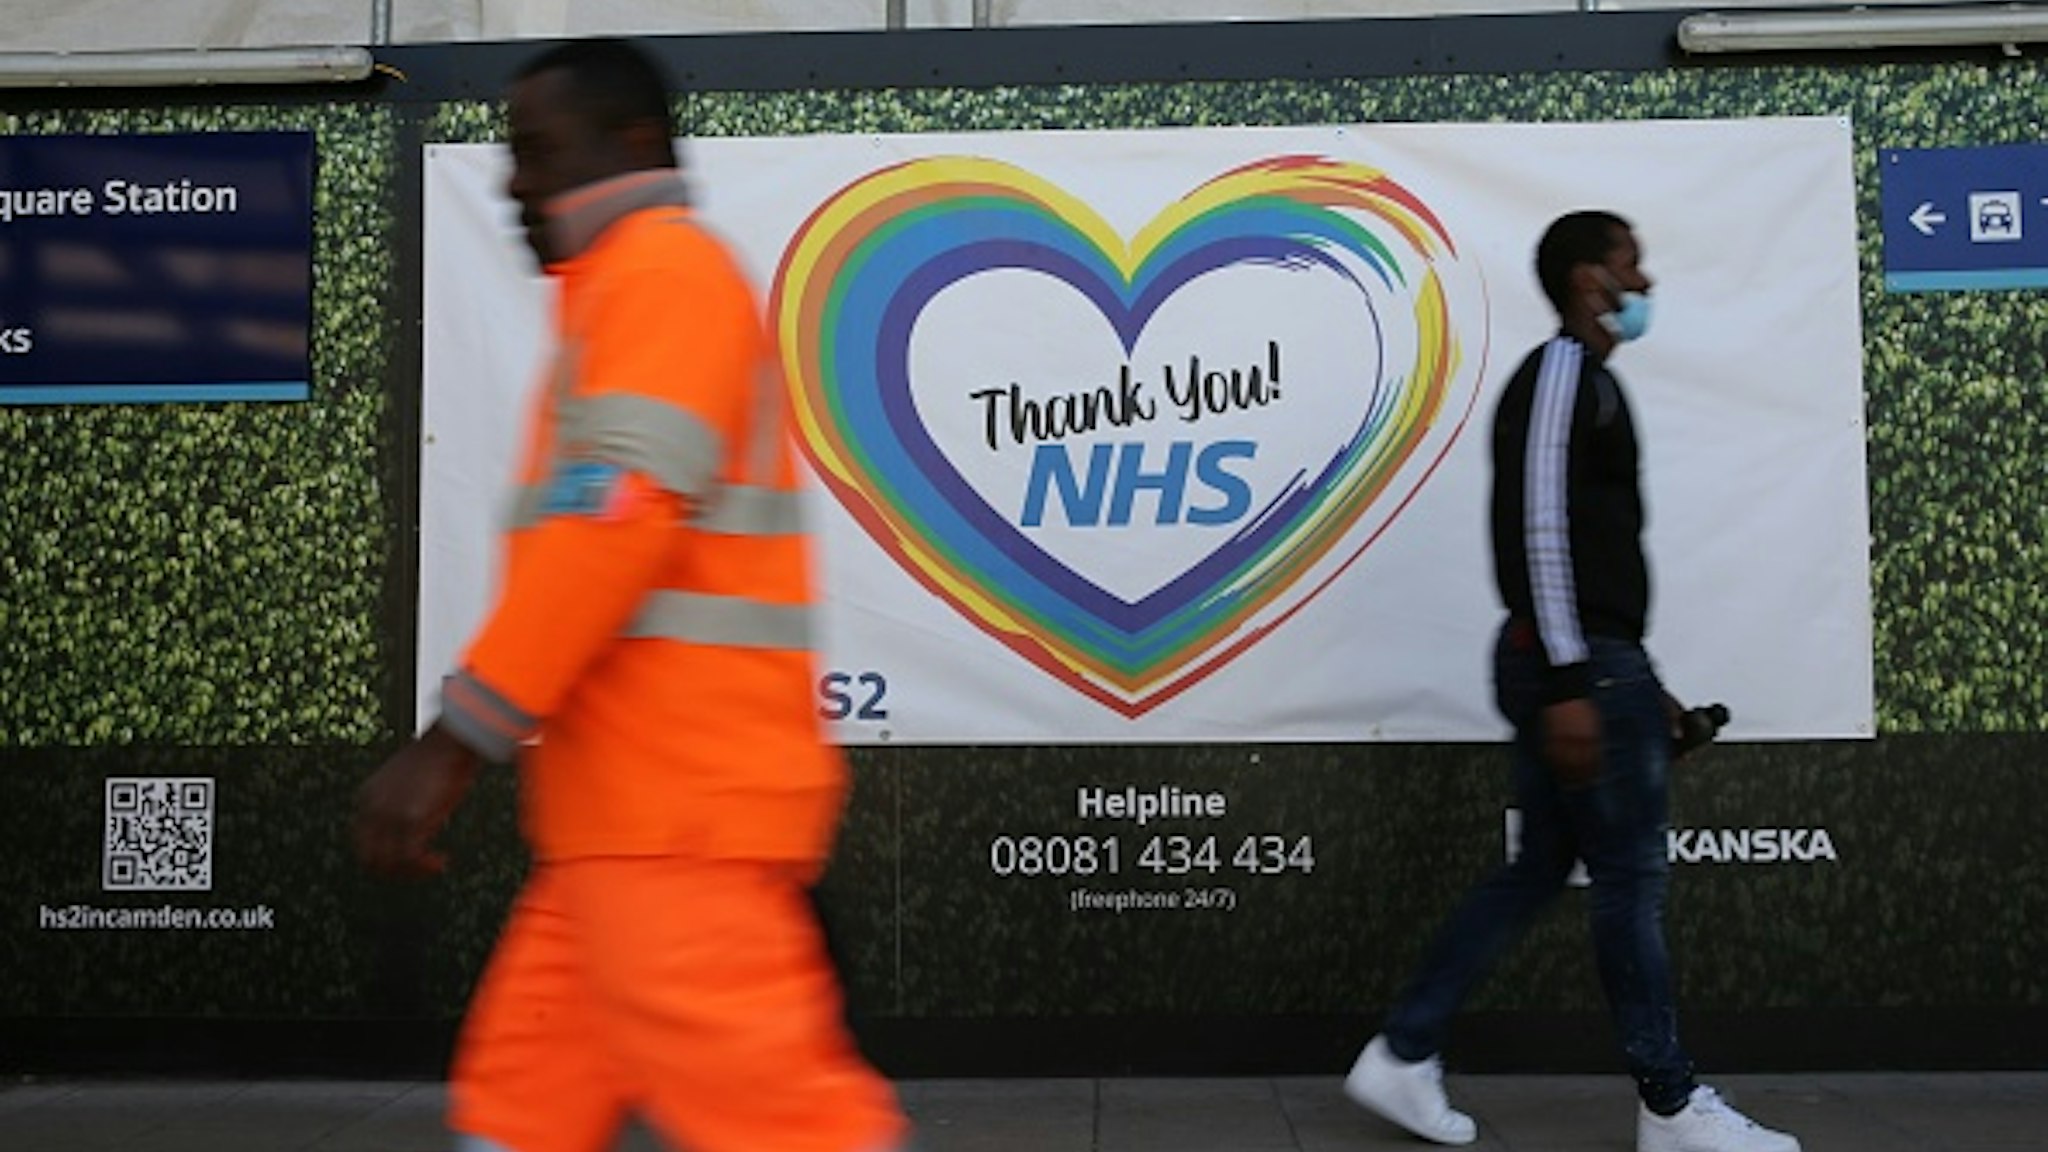 Two men walk past a sign thanking members of the NHS who continue to work during the COVID-19 outbreak at the HS2 building site near Euston in London on May 6, 2020 as life continues under a nationwide lockdown imposed to slow the spread of the novel coronavirus. - Cross-Channel train operator Eurostar on May 2 said face masks covering the mouth and nose would be compulsory on services between London, Paris and Brussels from May 4. Britain's death toll from the coronavirus has topped 32,000, according to an updated official count released May 5, pushing the country past Italy to become the second-most impacted after the United States.